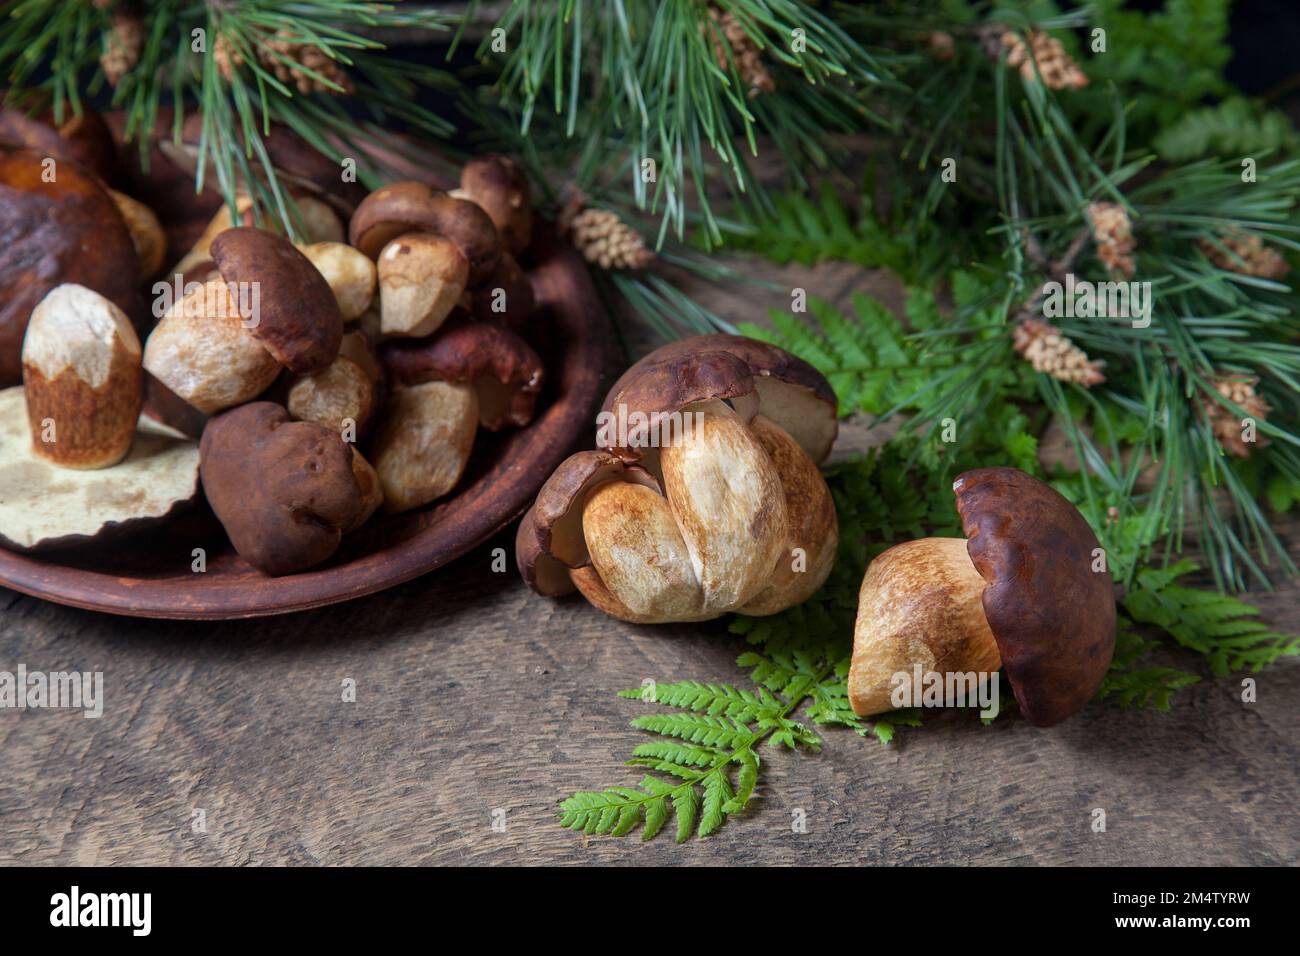 Autumn composition of boletus badius, imleria badia or bay bolete, clay bowl with mushrooms on vintage wooden background with green branch of pine tre Stock Photo